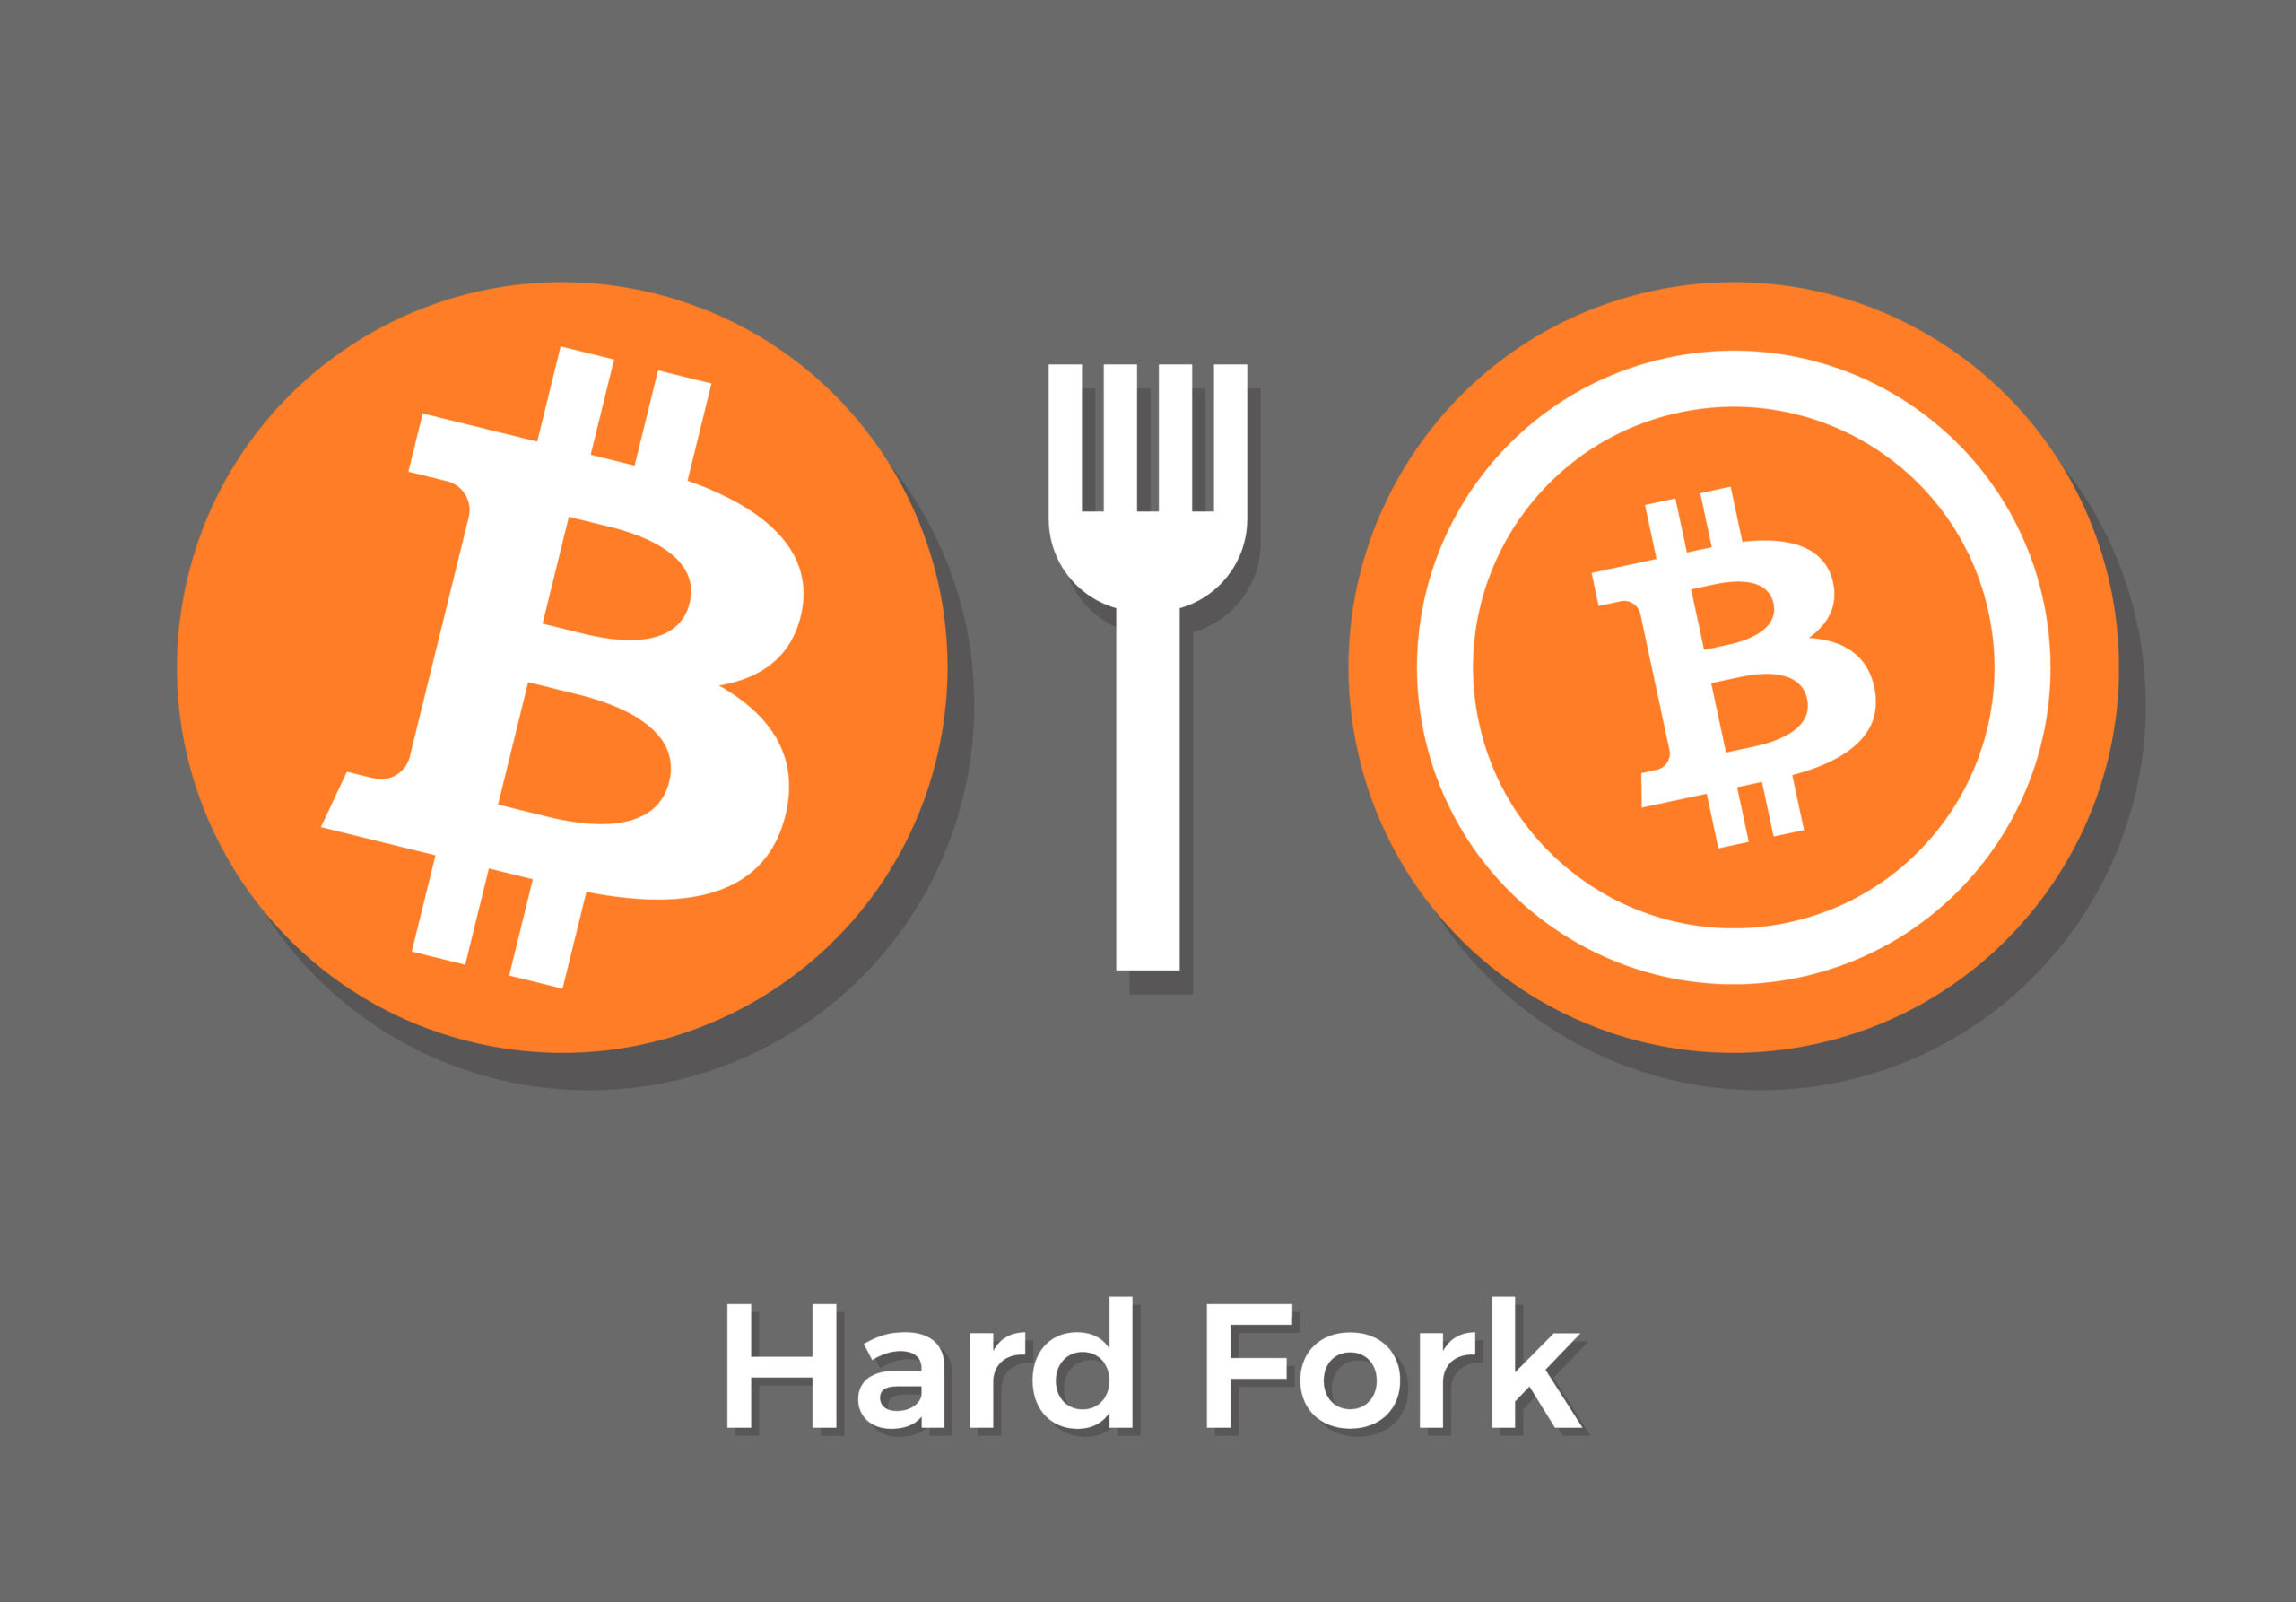 List of bitcoin forks - Wikipedia